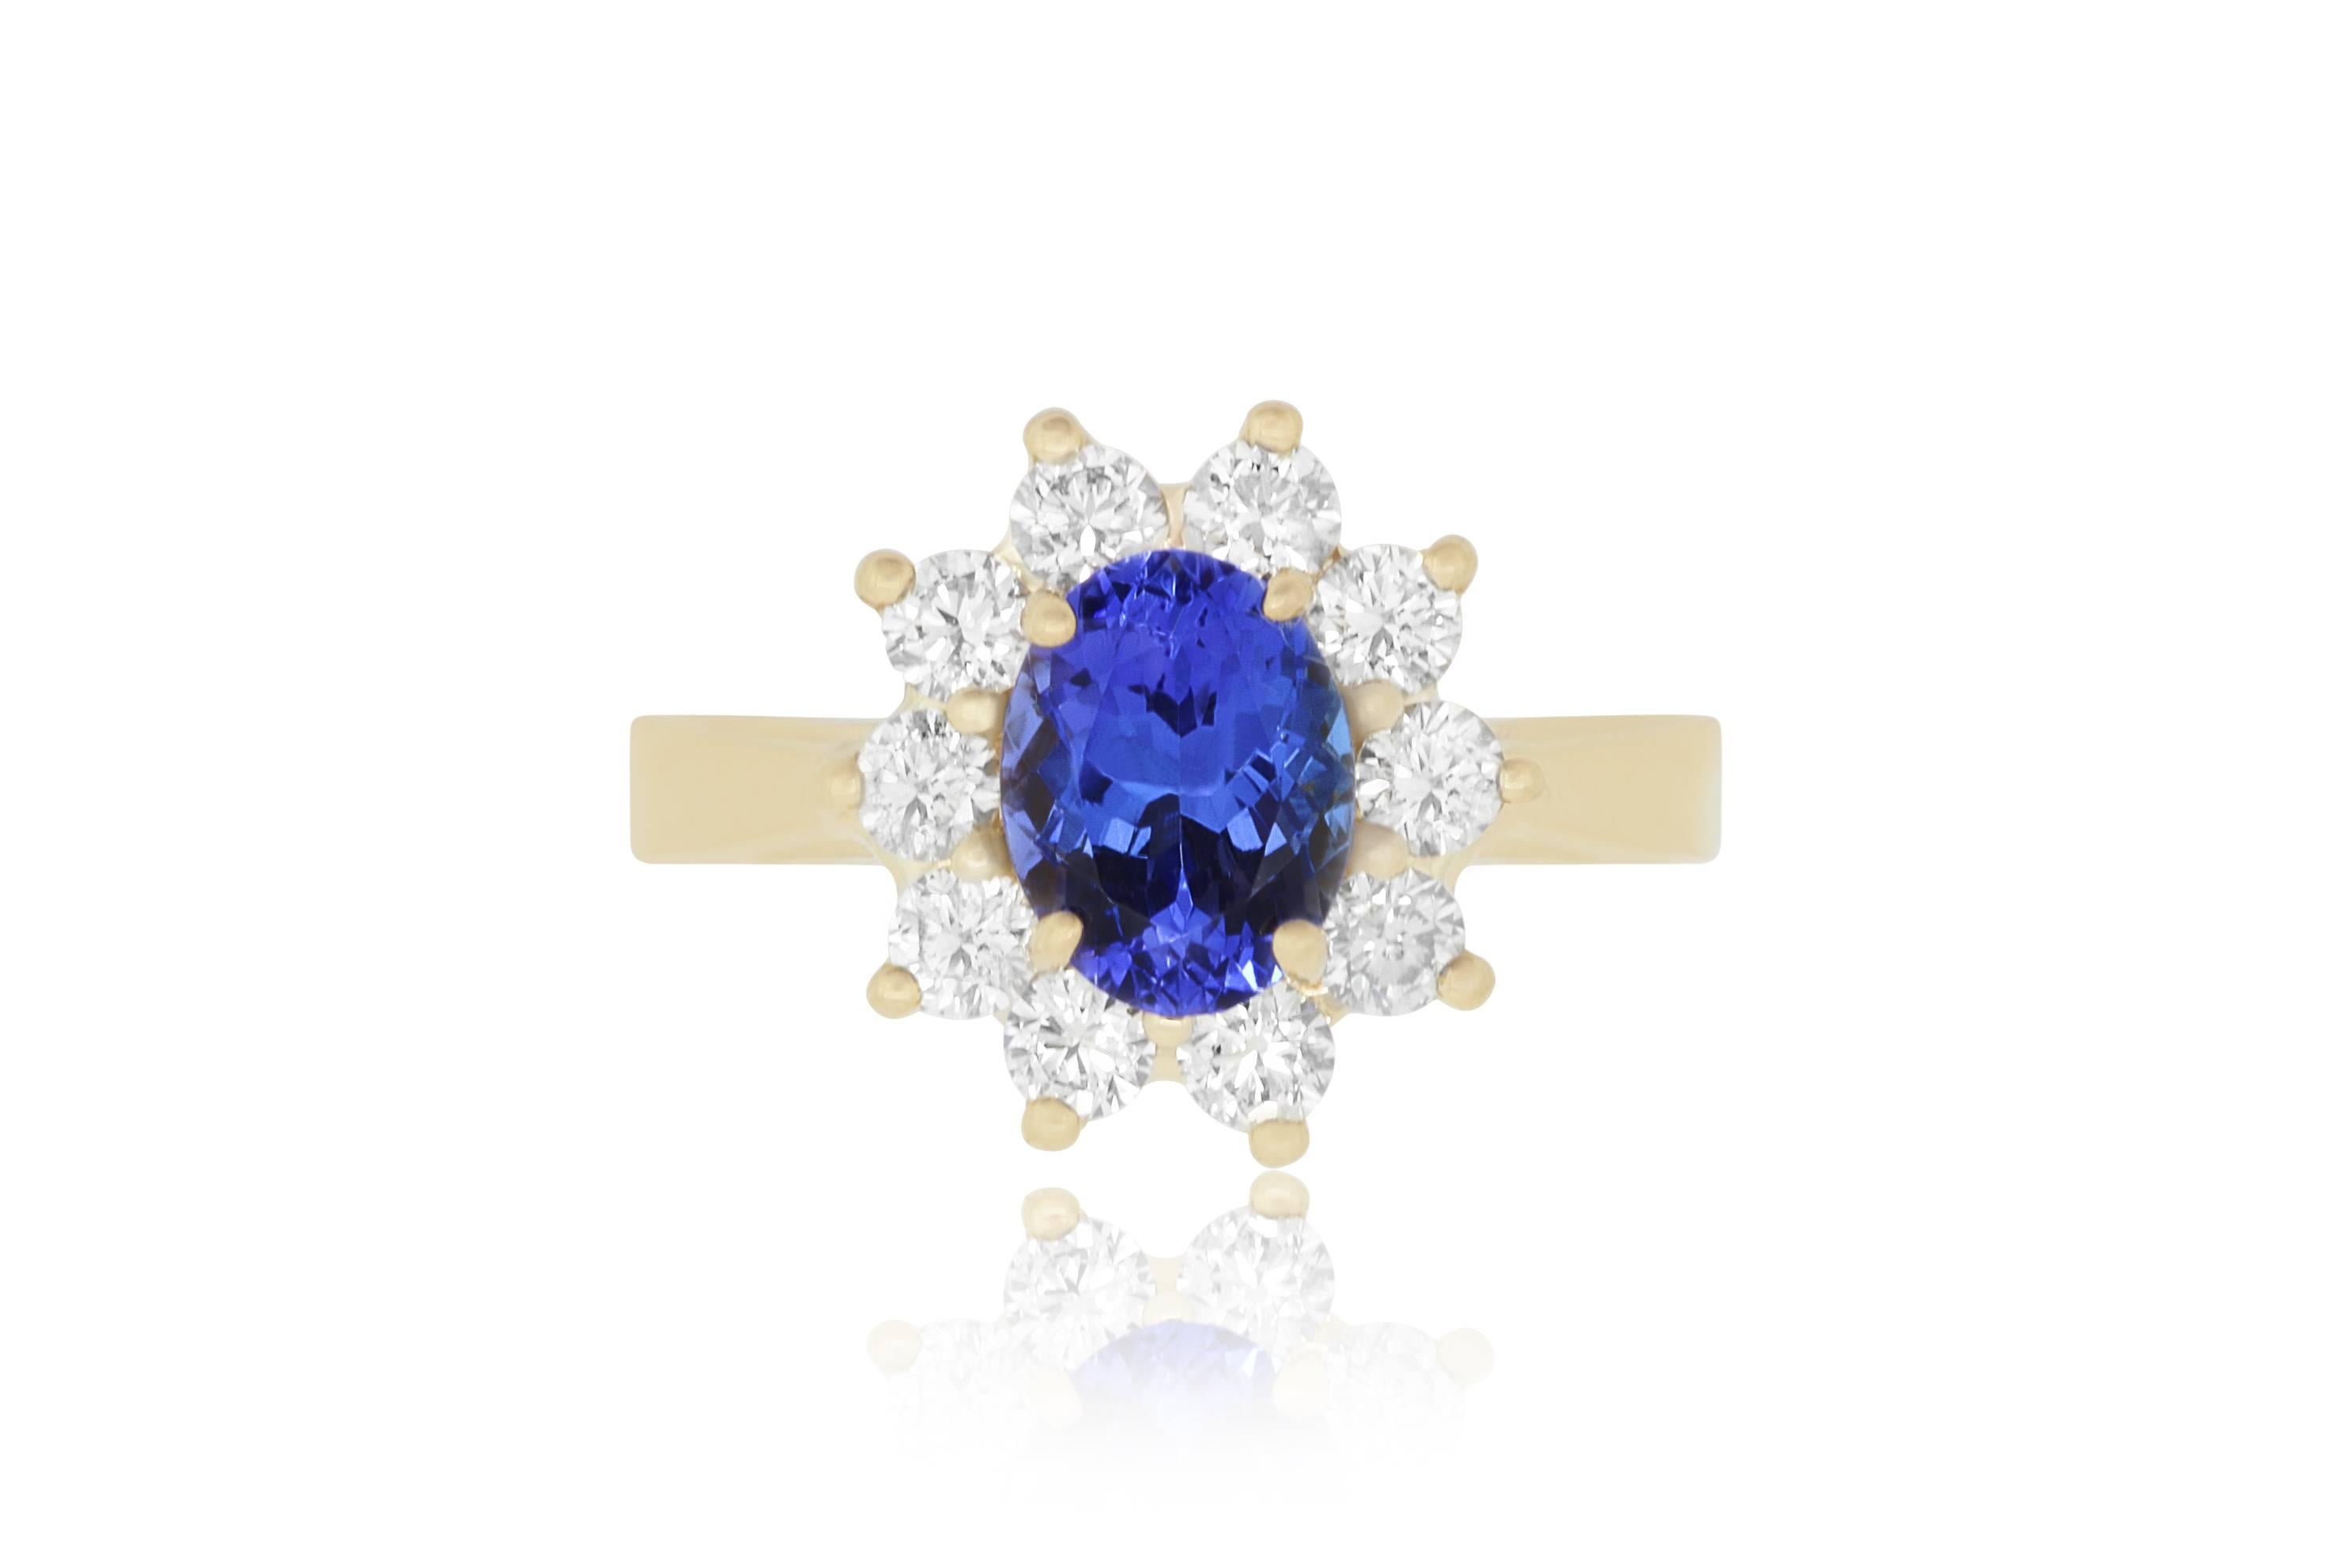 This ring is perfect for the colored jewelry lover. A stunning 1.43 Carat Oval shaped Tanzanite is framed by a snowflake made up of 0.73 Carats of White diamonds. A beautiful blend of classic and chic.

Material: 14k Yellow Gold
Gemstones: 1 Oval